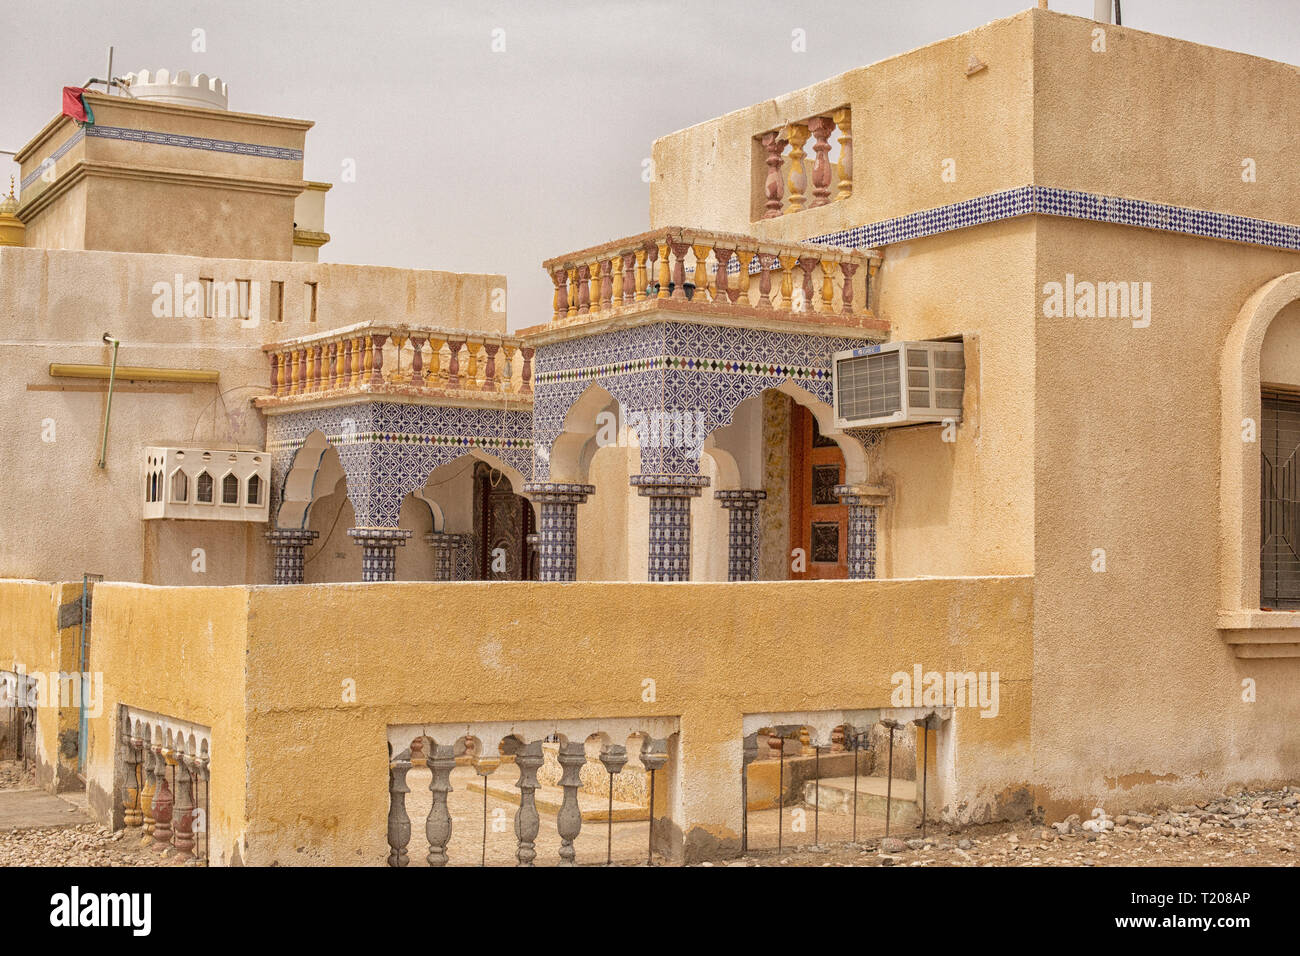 Beautiful decorated house with ceramic tiles in Oman Stock Photo